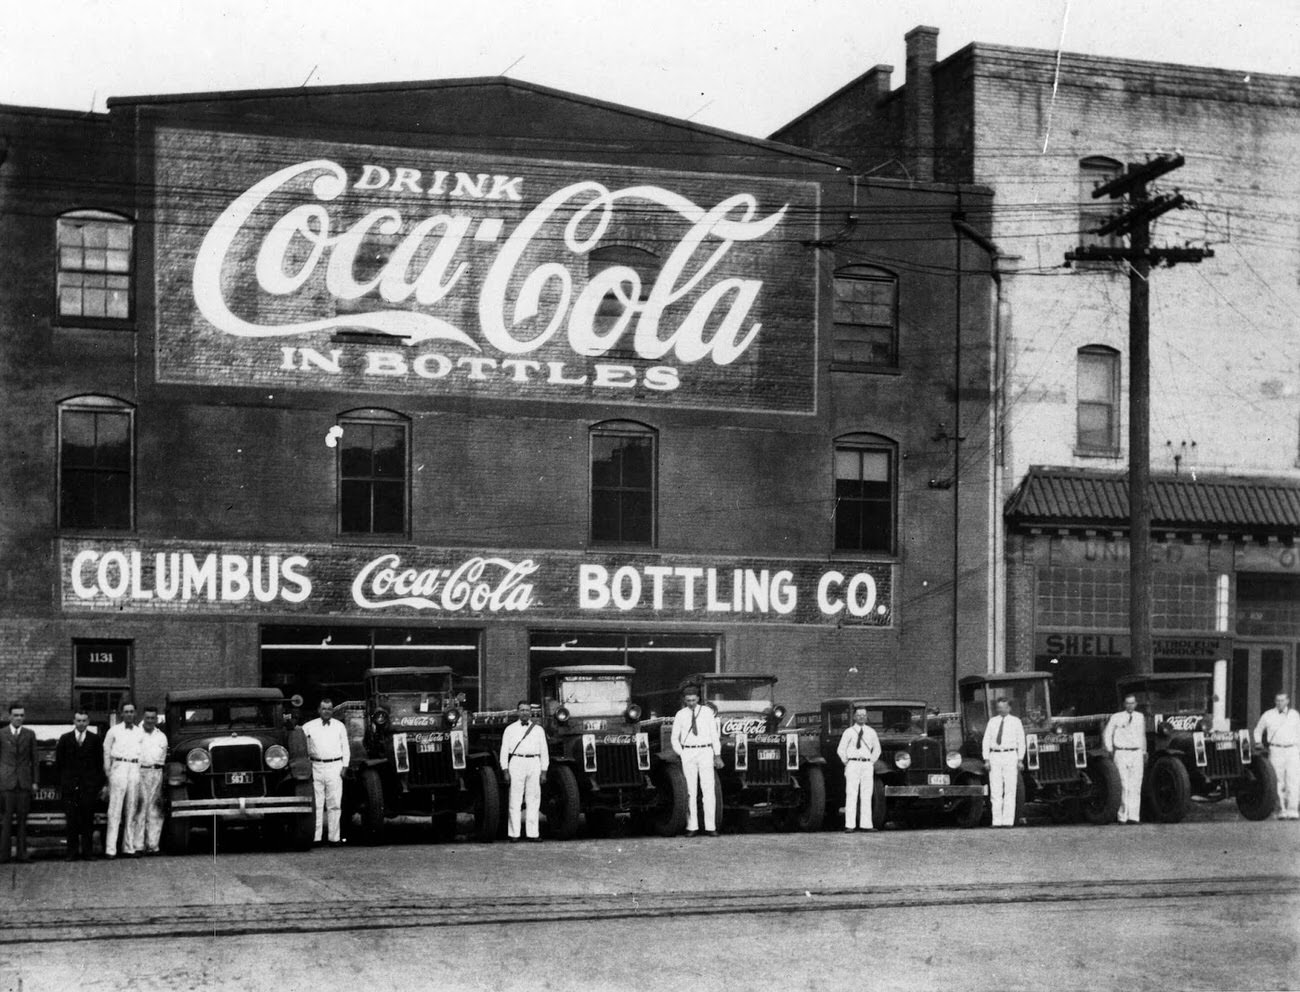 Coca-Cola delivery truck drivers beside their vehicles outside a bottling plant, 1921.